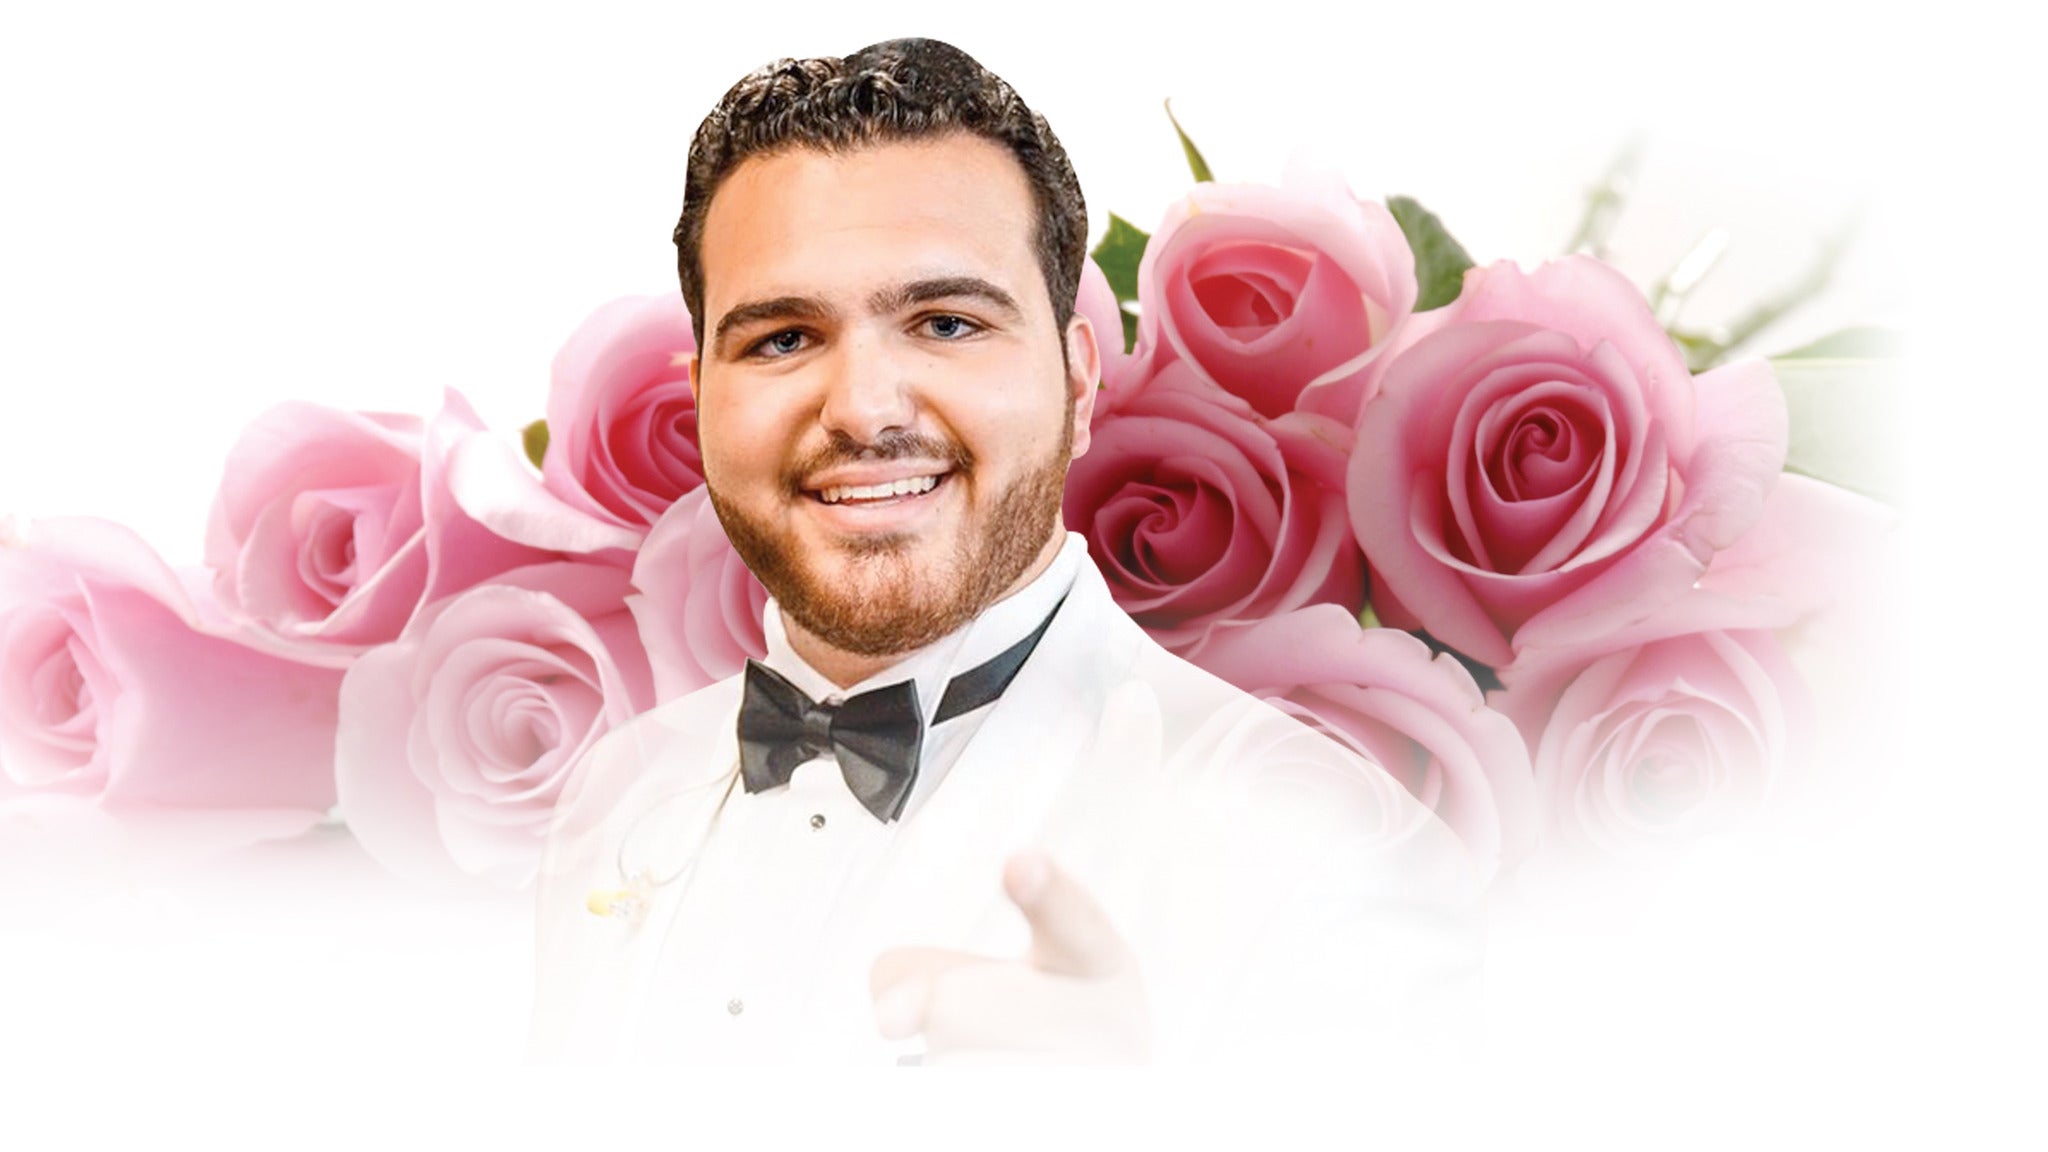 Sal "The Voice" Valentinetti in Upper Darby promo photo for Live Nation presale offer code